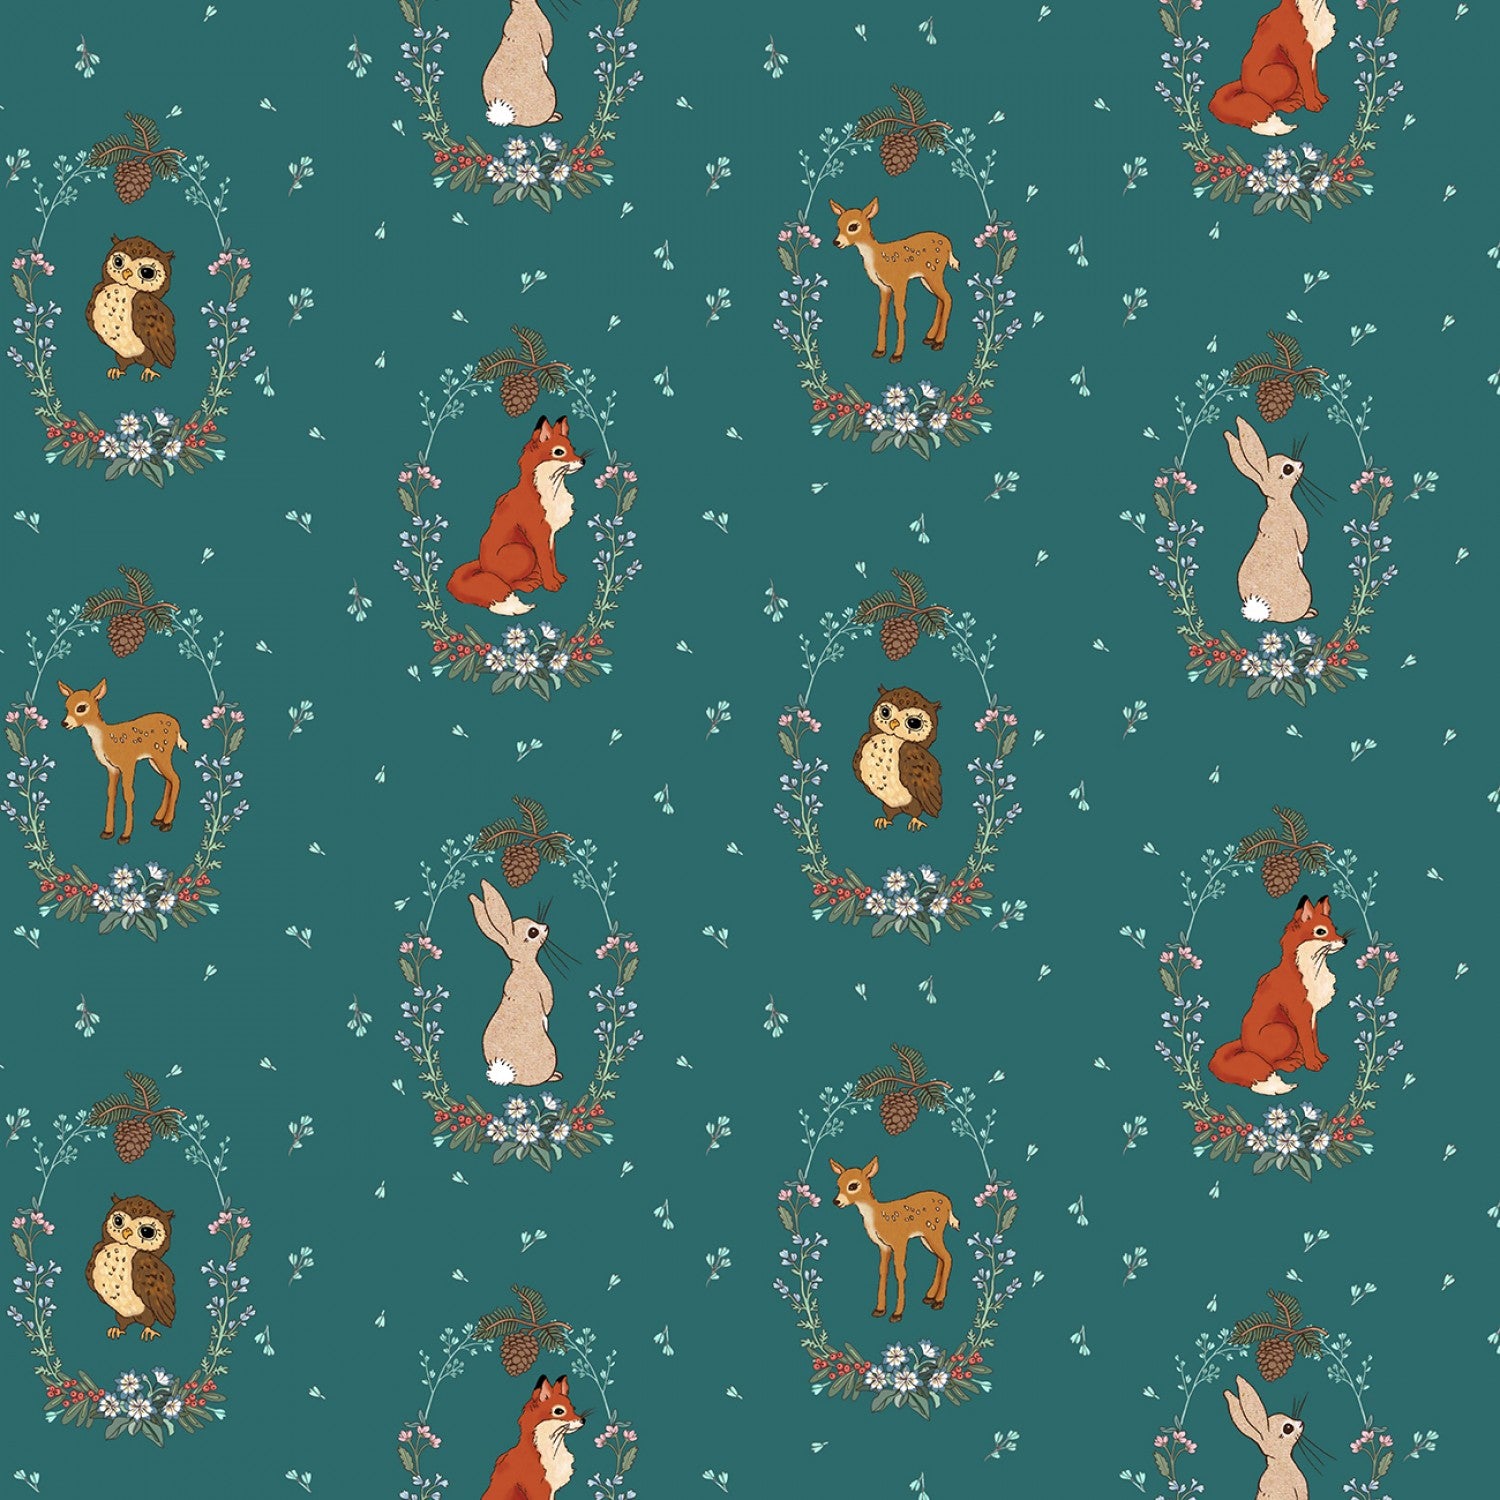 Midnight Forest - Animal Vignettes Teal by Belle & Boo for Michael Miller